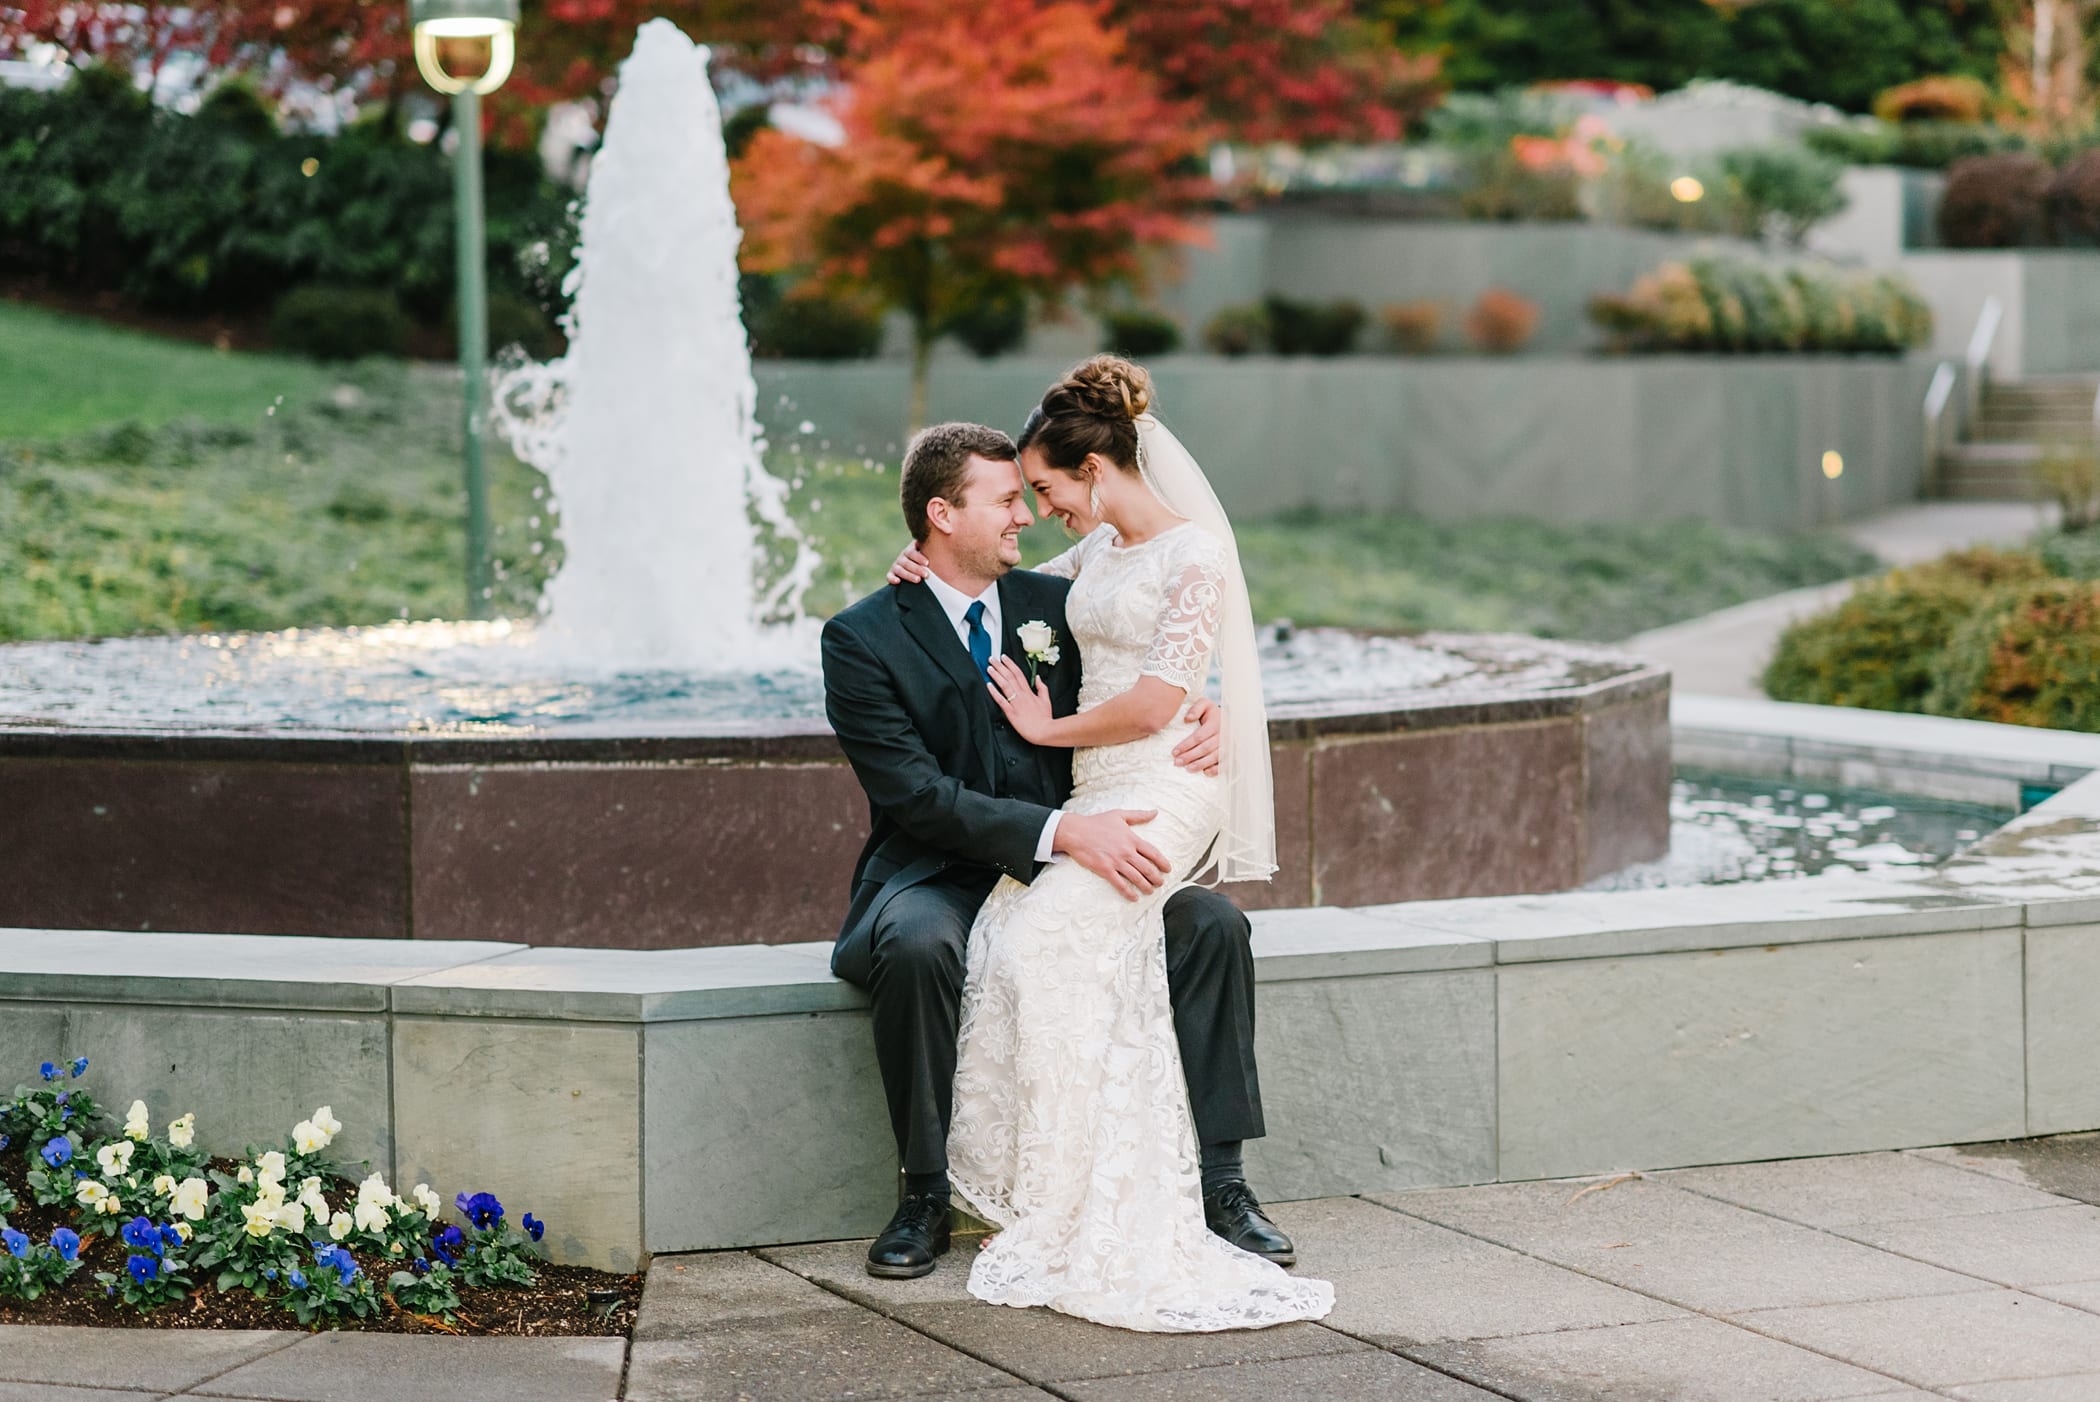 Classic Blue and white Portland Oregon Temple wedding in the fall by Michelle & Logan